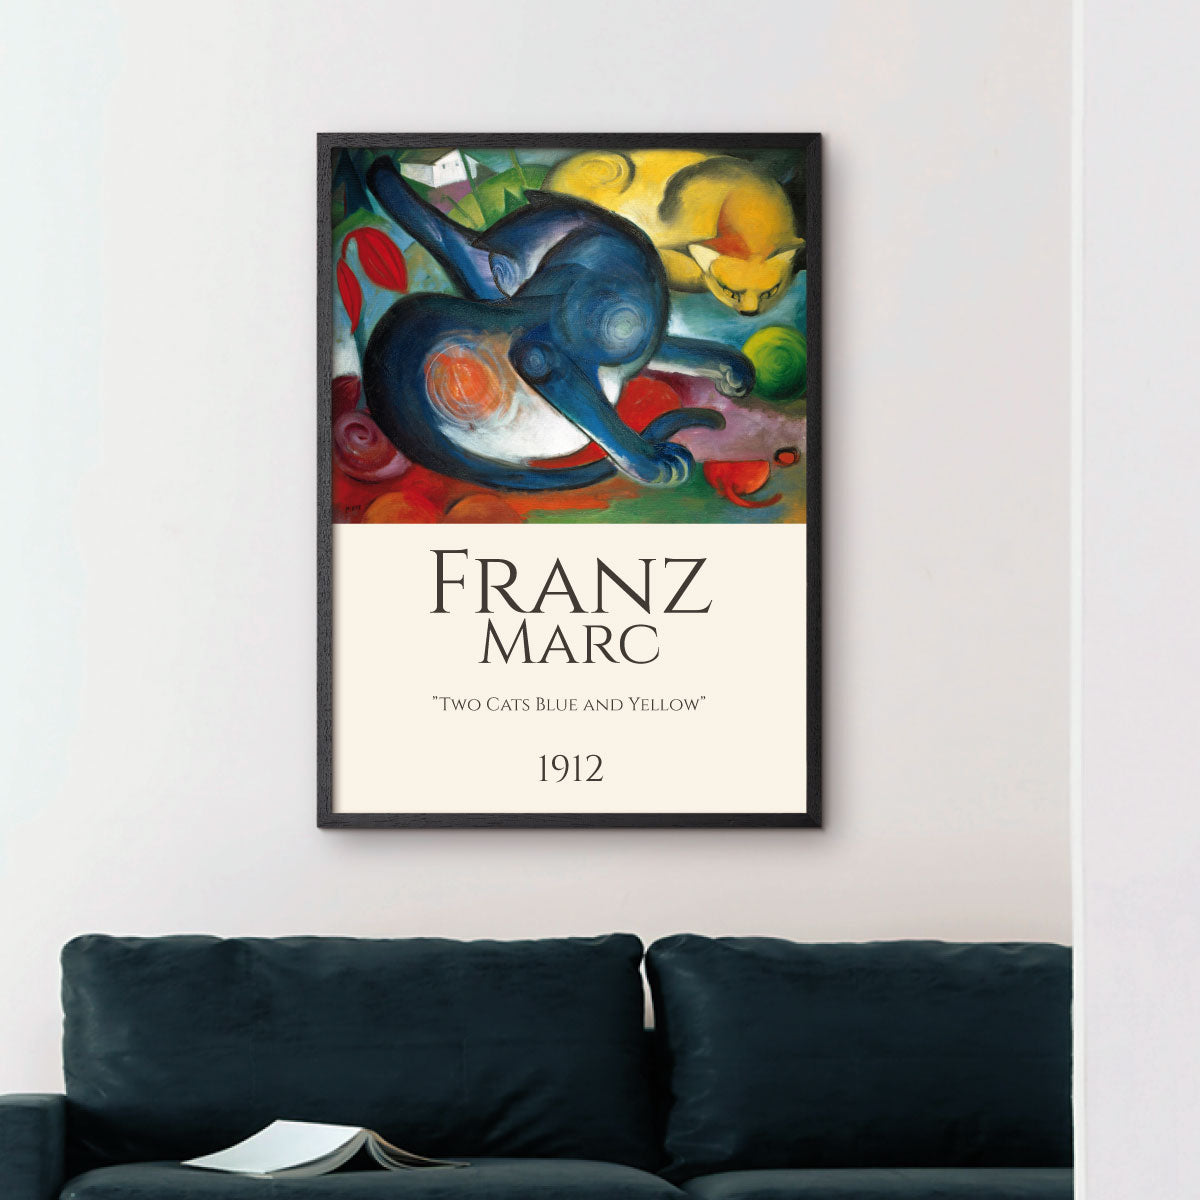 Art poster with Franz Marcs "Two cats blue and yellow"